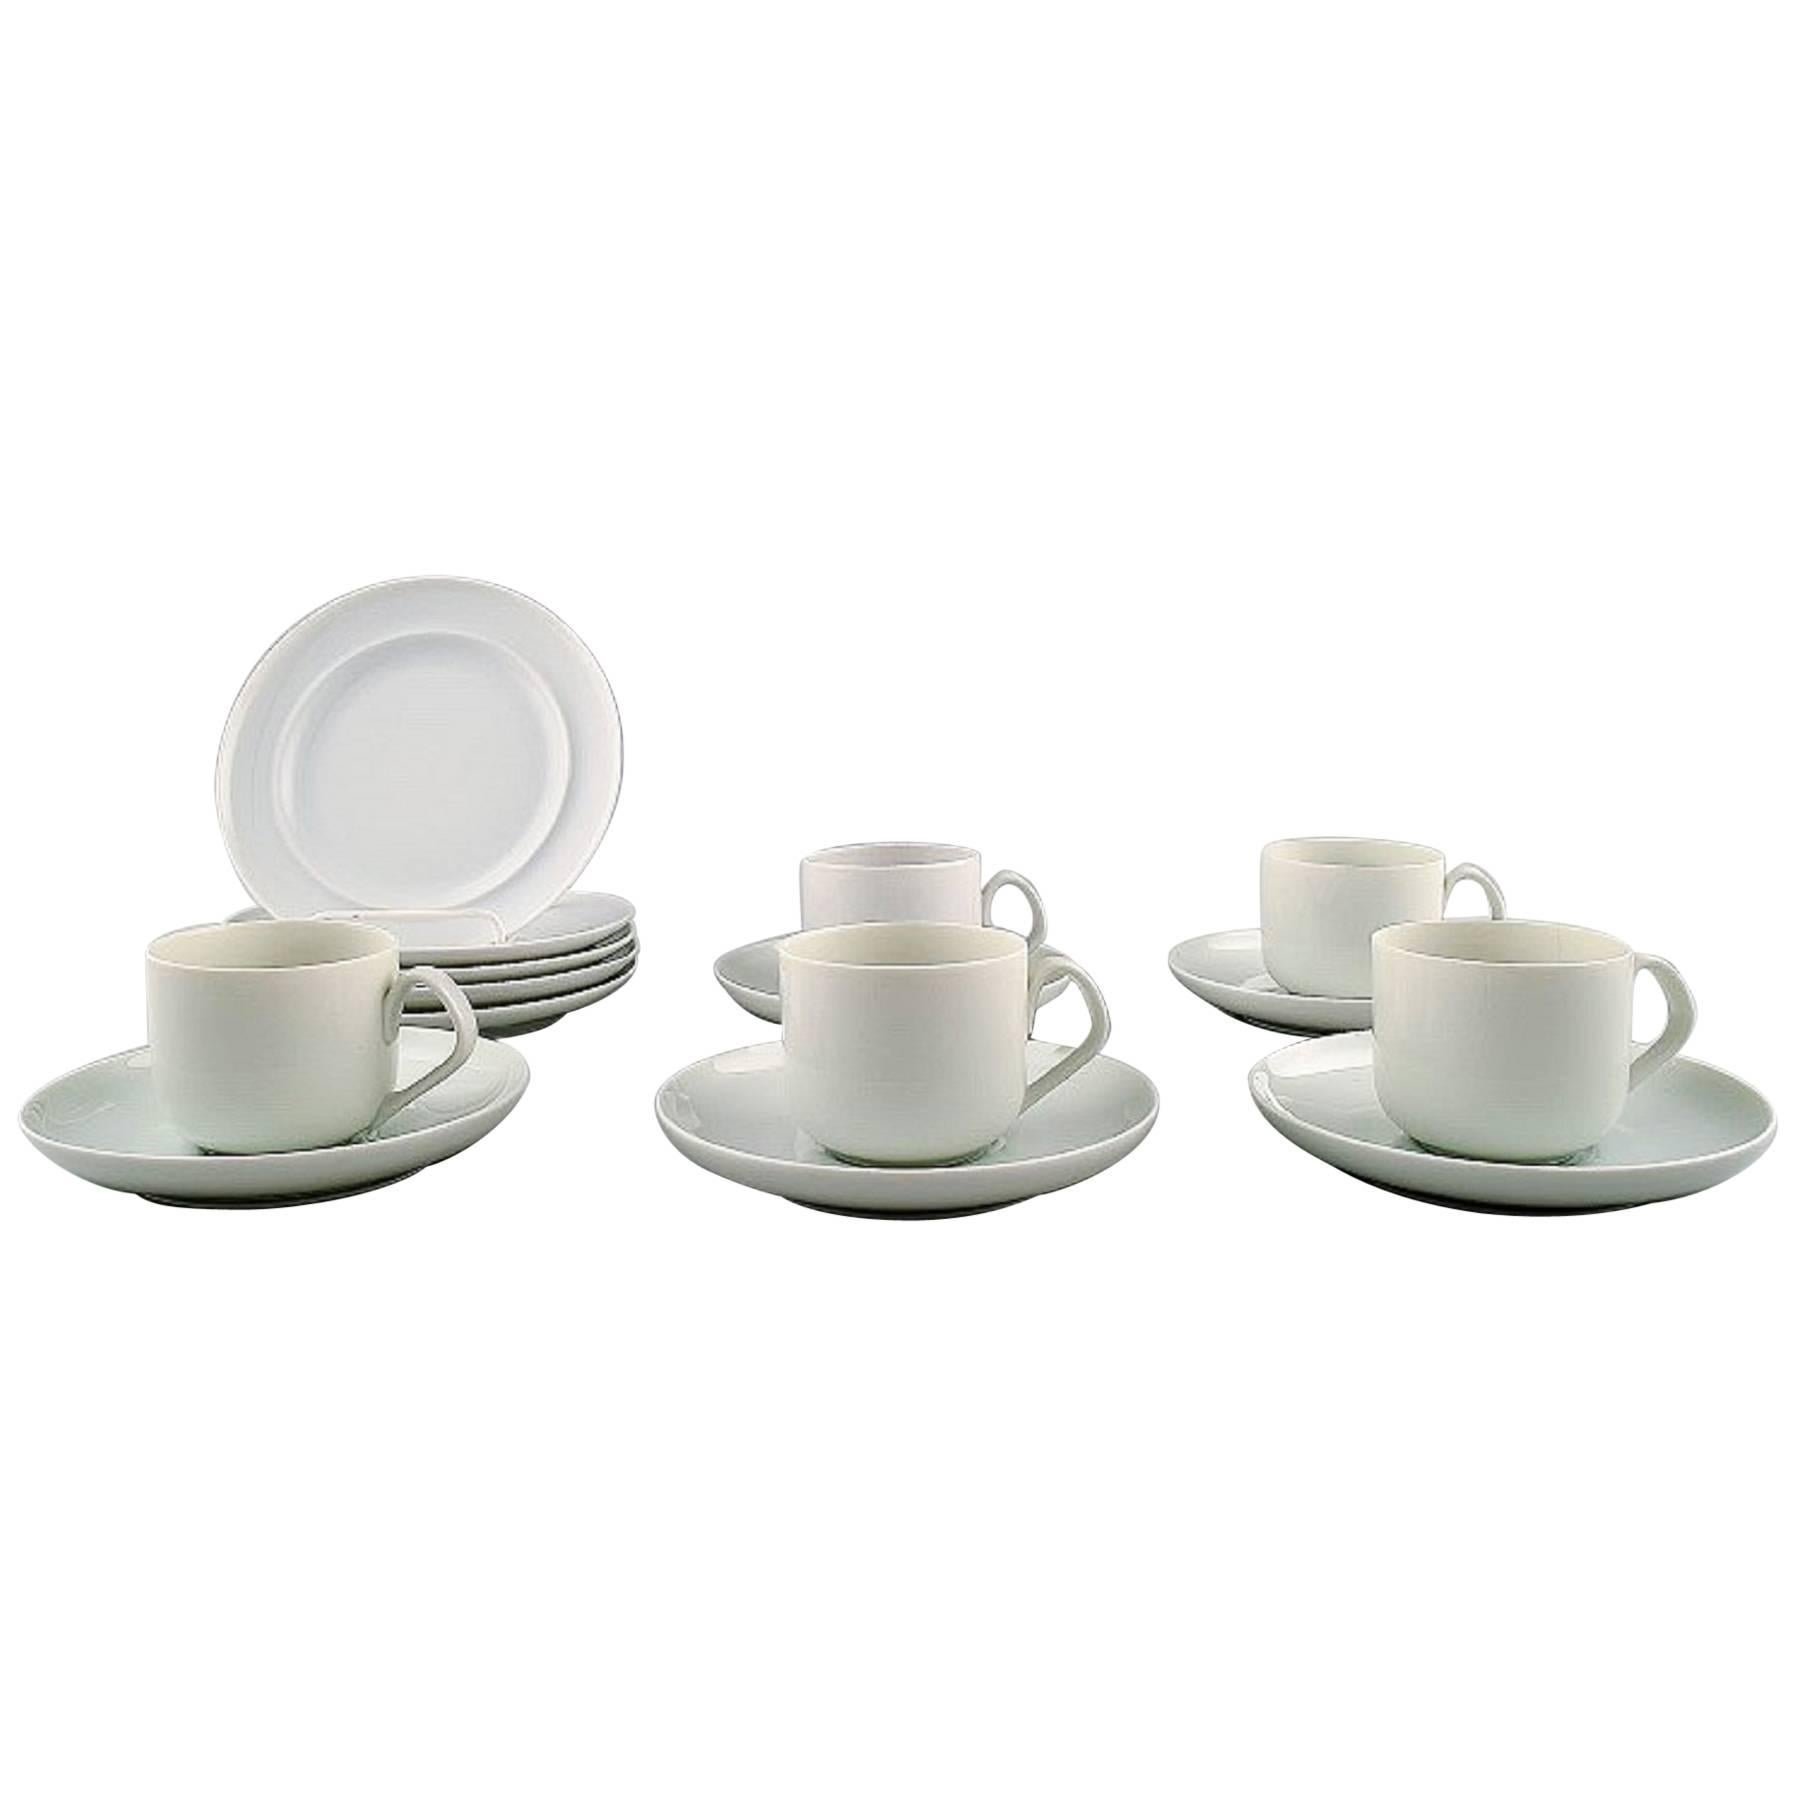 Bing & Grondahl, B&G, White Koppel, Five Person Coffee Service For Sale